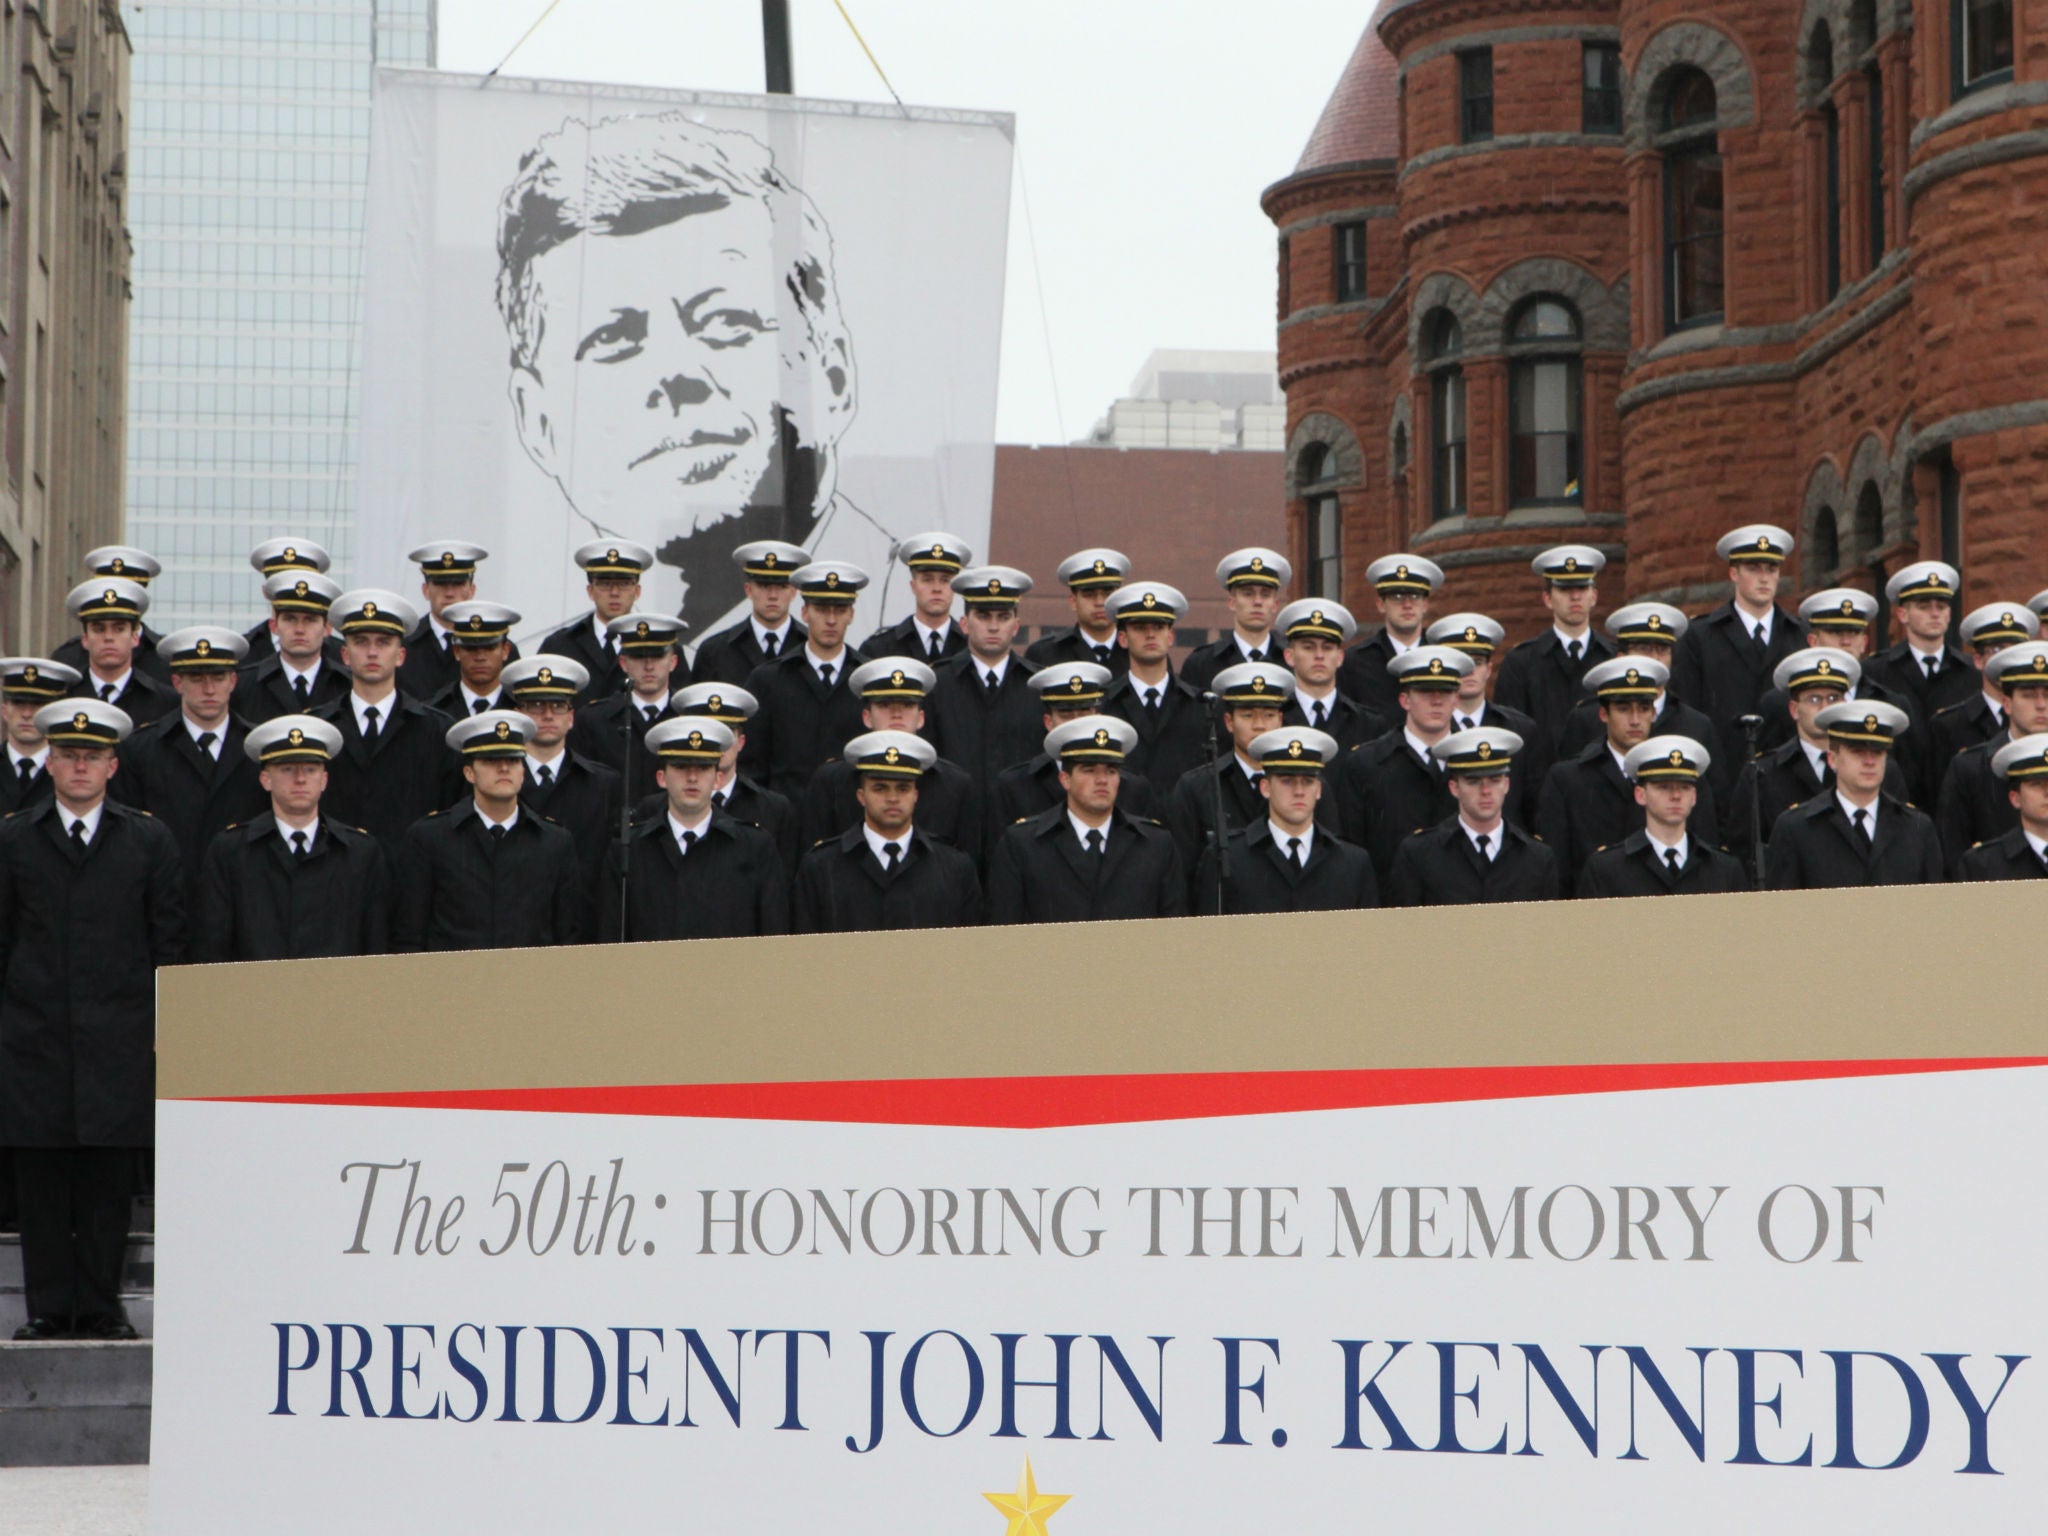 Members of the US Naval Academy mark the anniversary of John F Kennedy's assassination in Dallas, Texas